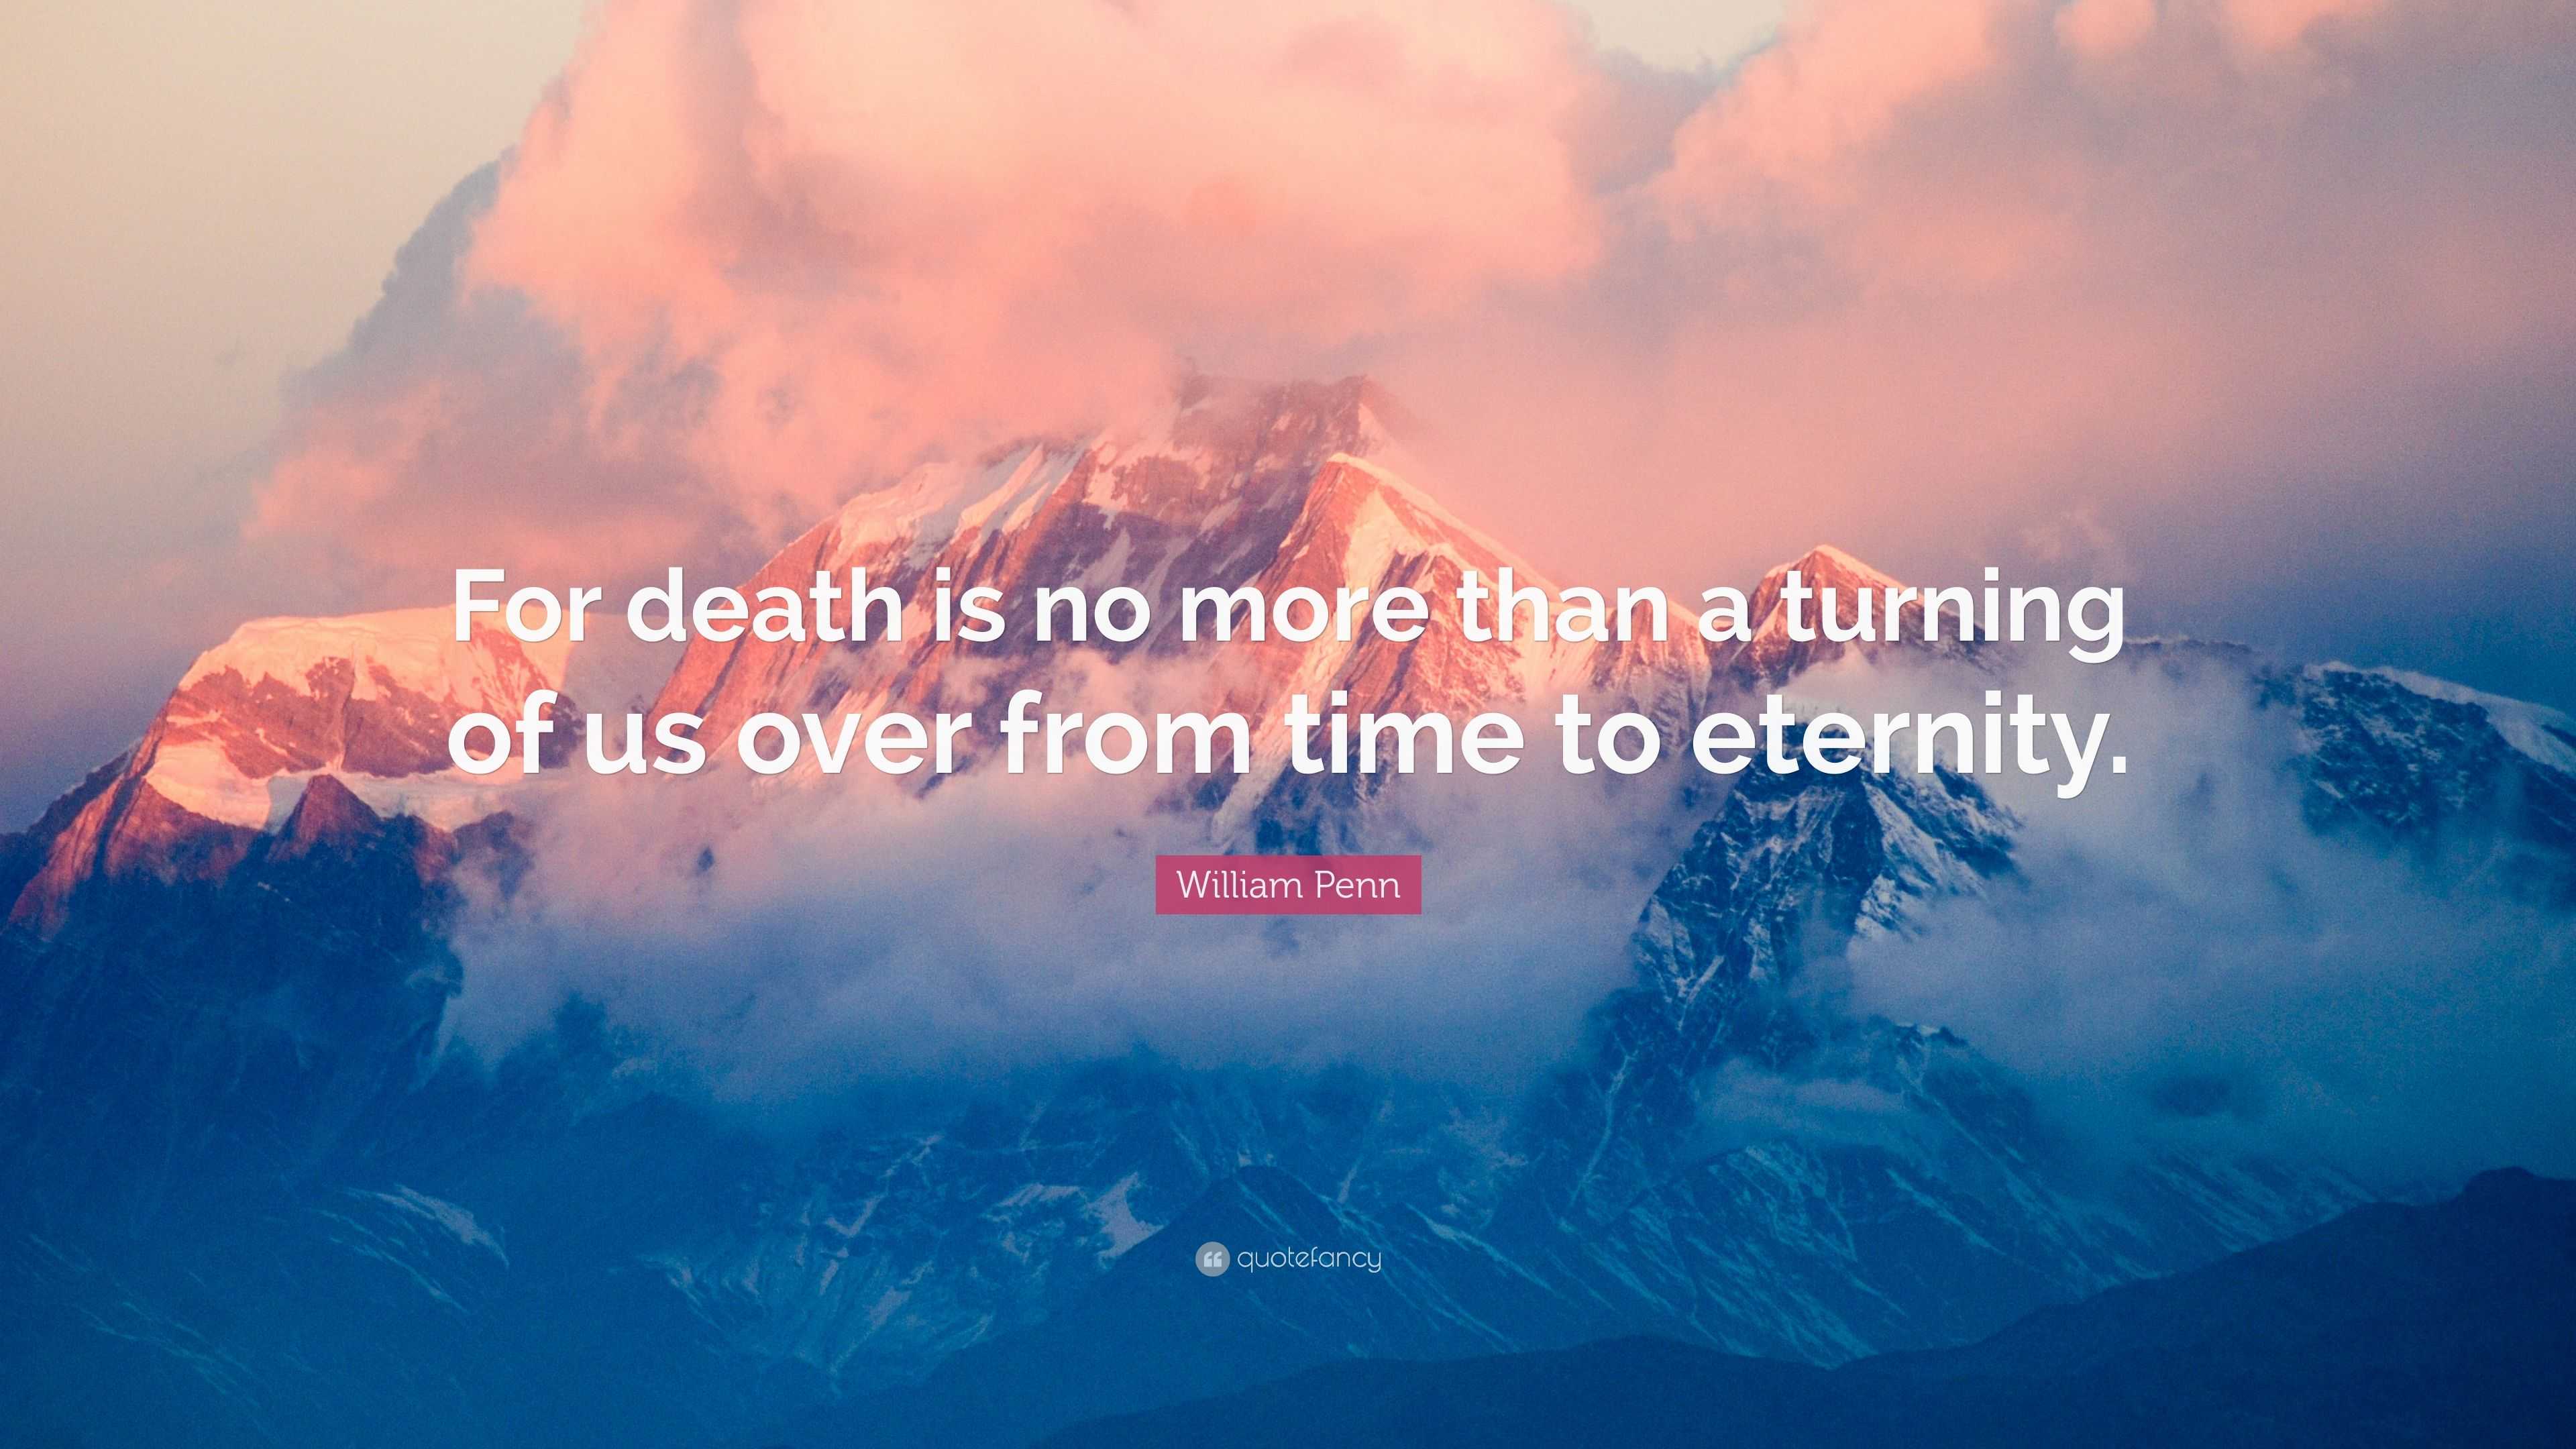 William Penn Quote: “For death is no more than a turning of us over ...